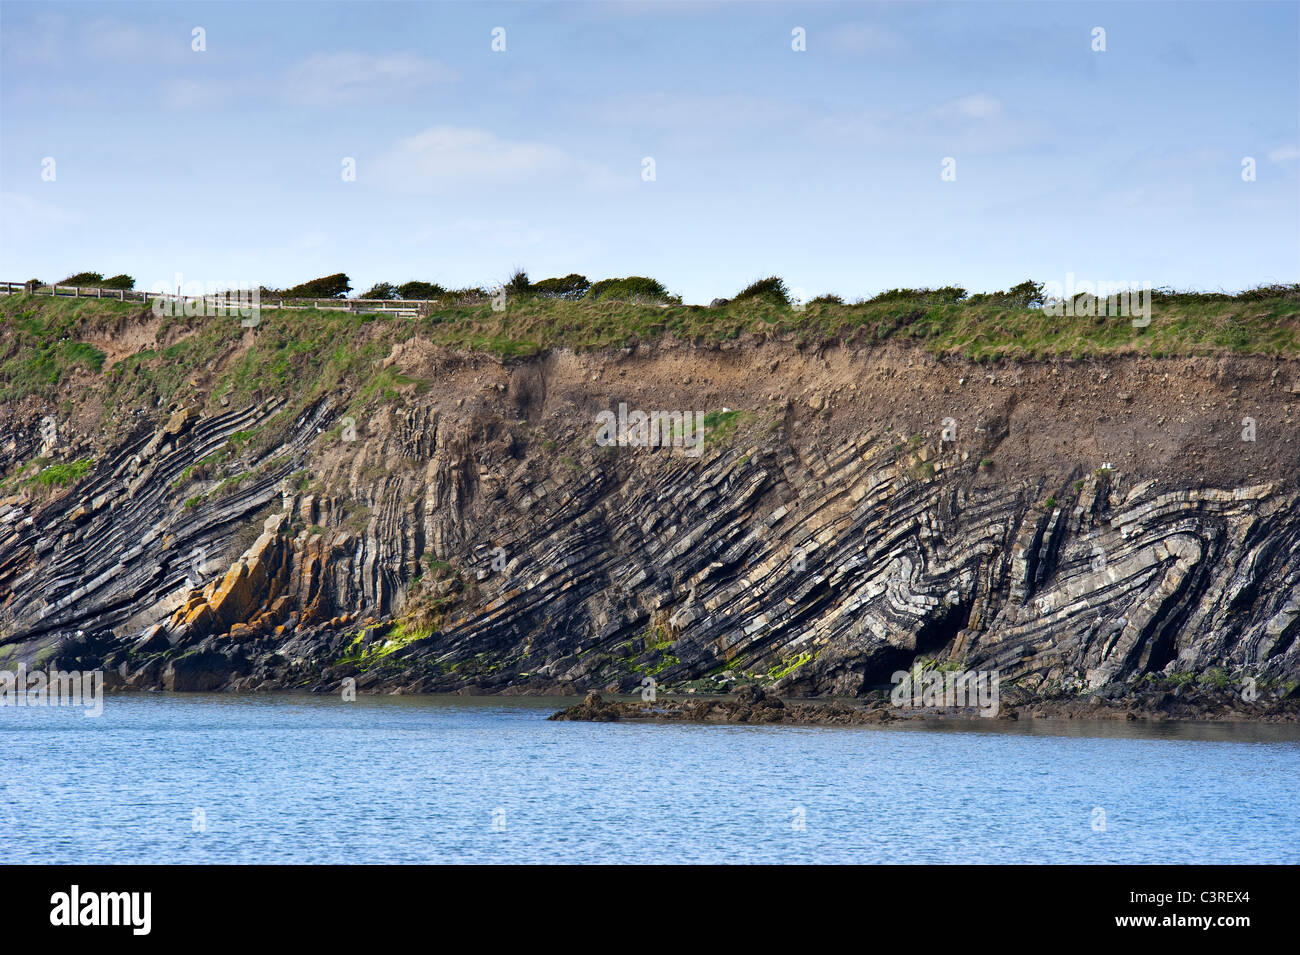 Folding of the stratigraphy of the Brigantian shales of the carboniferous era on the beach at Loughshinny, co.Dublin, Ireland Stock Photo